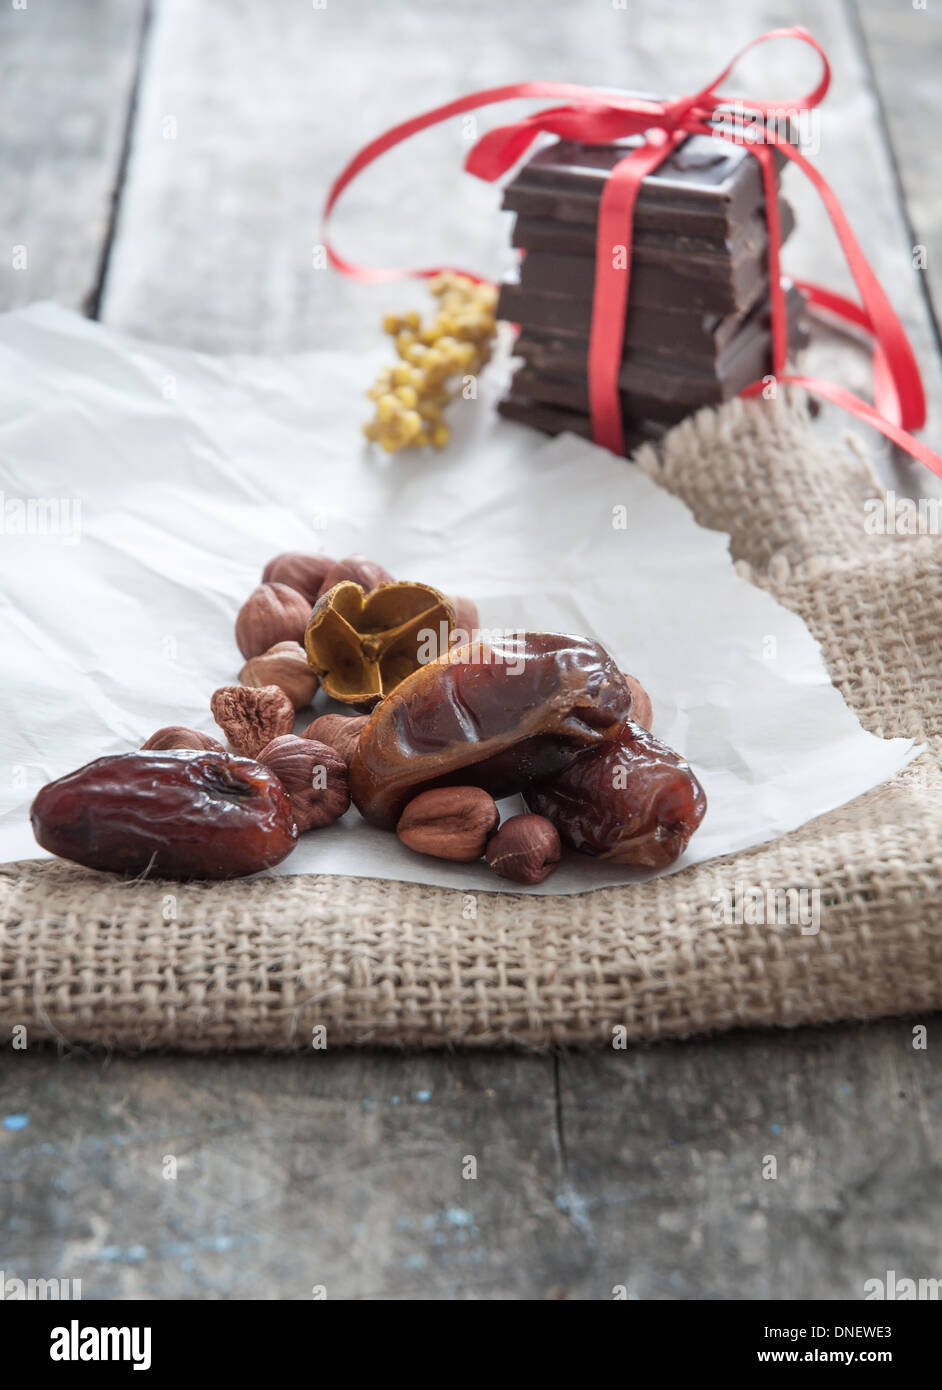 Delicious dates and chocolate on wooden surface Stock Photo